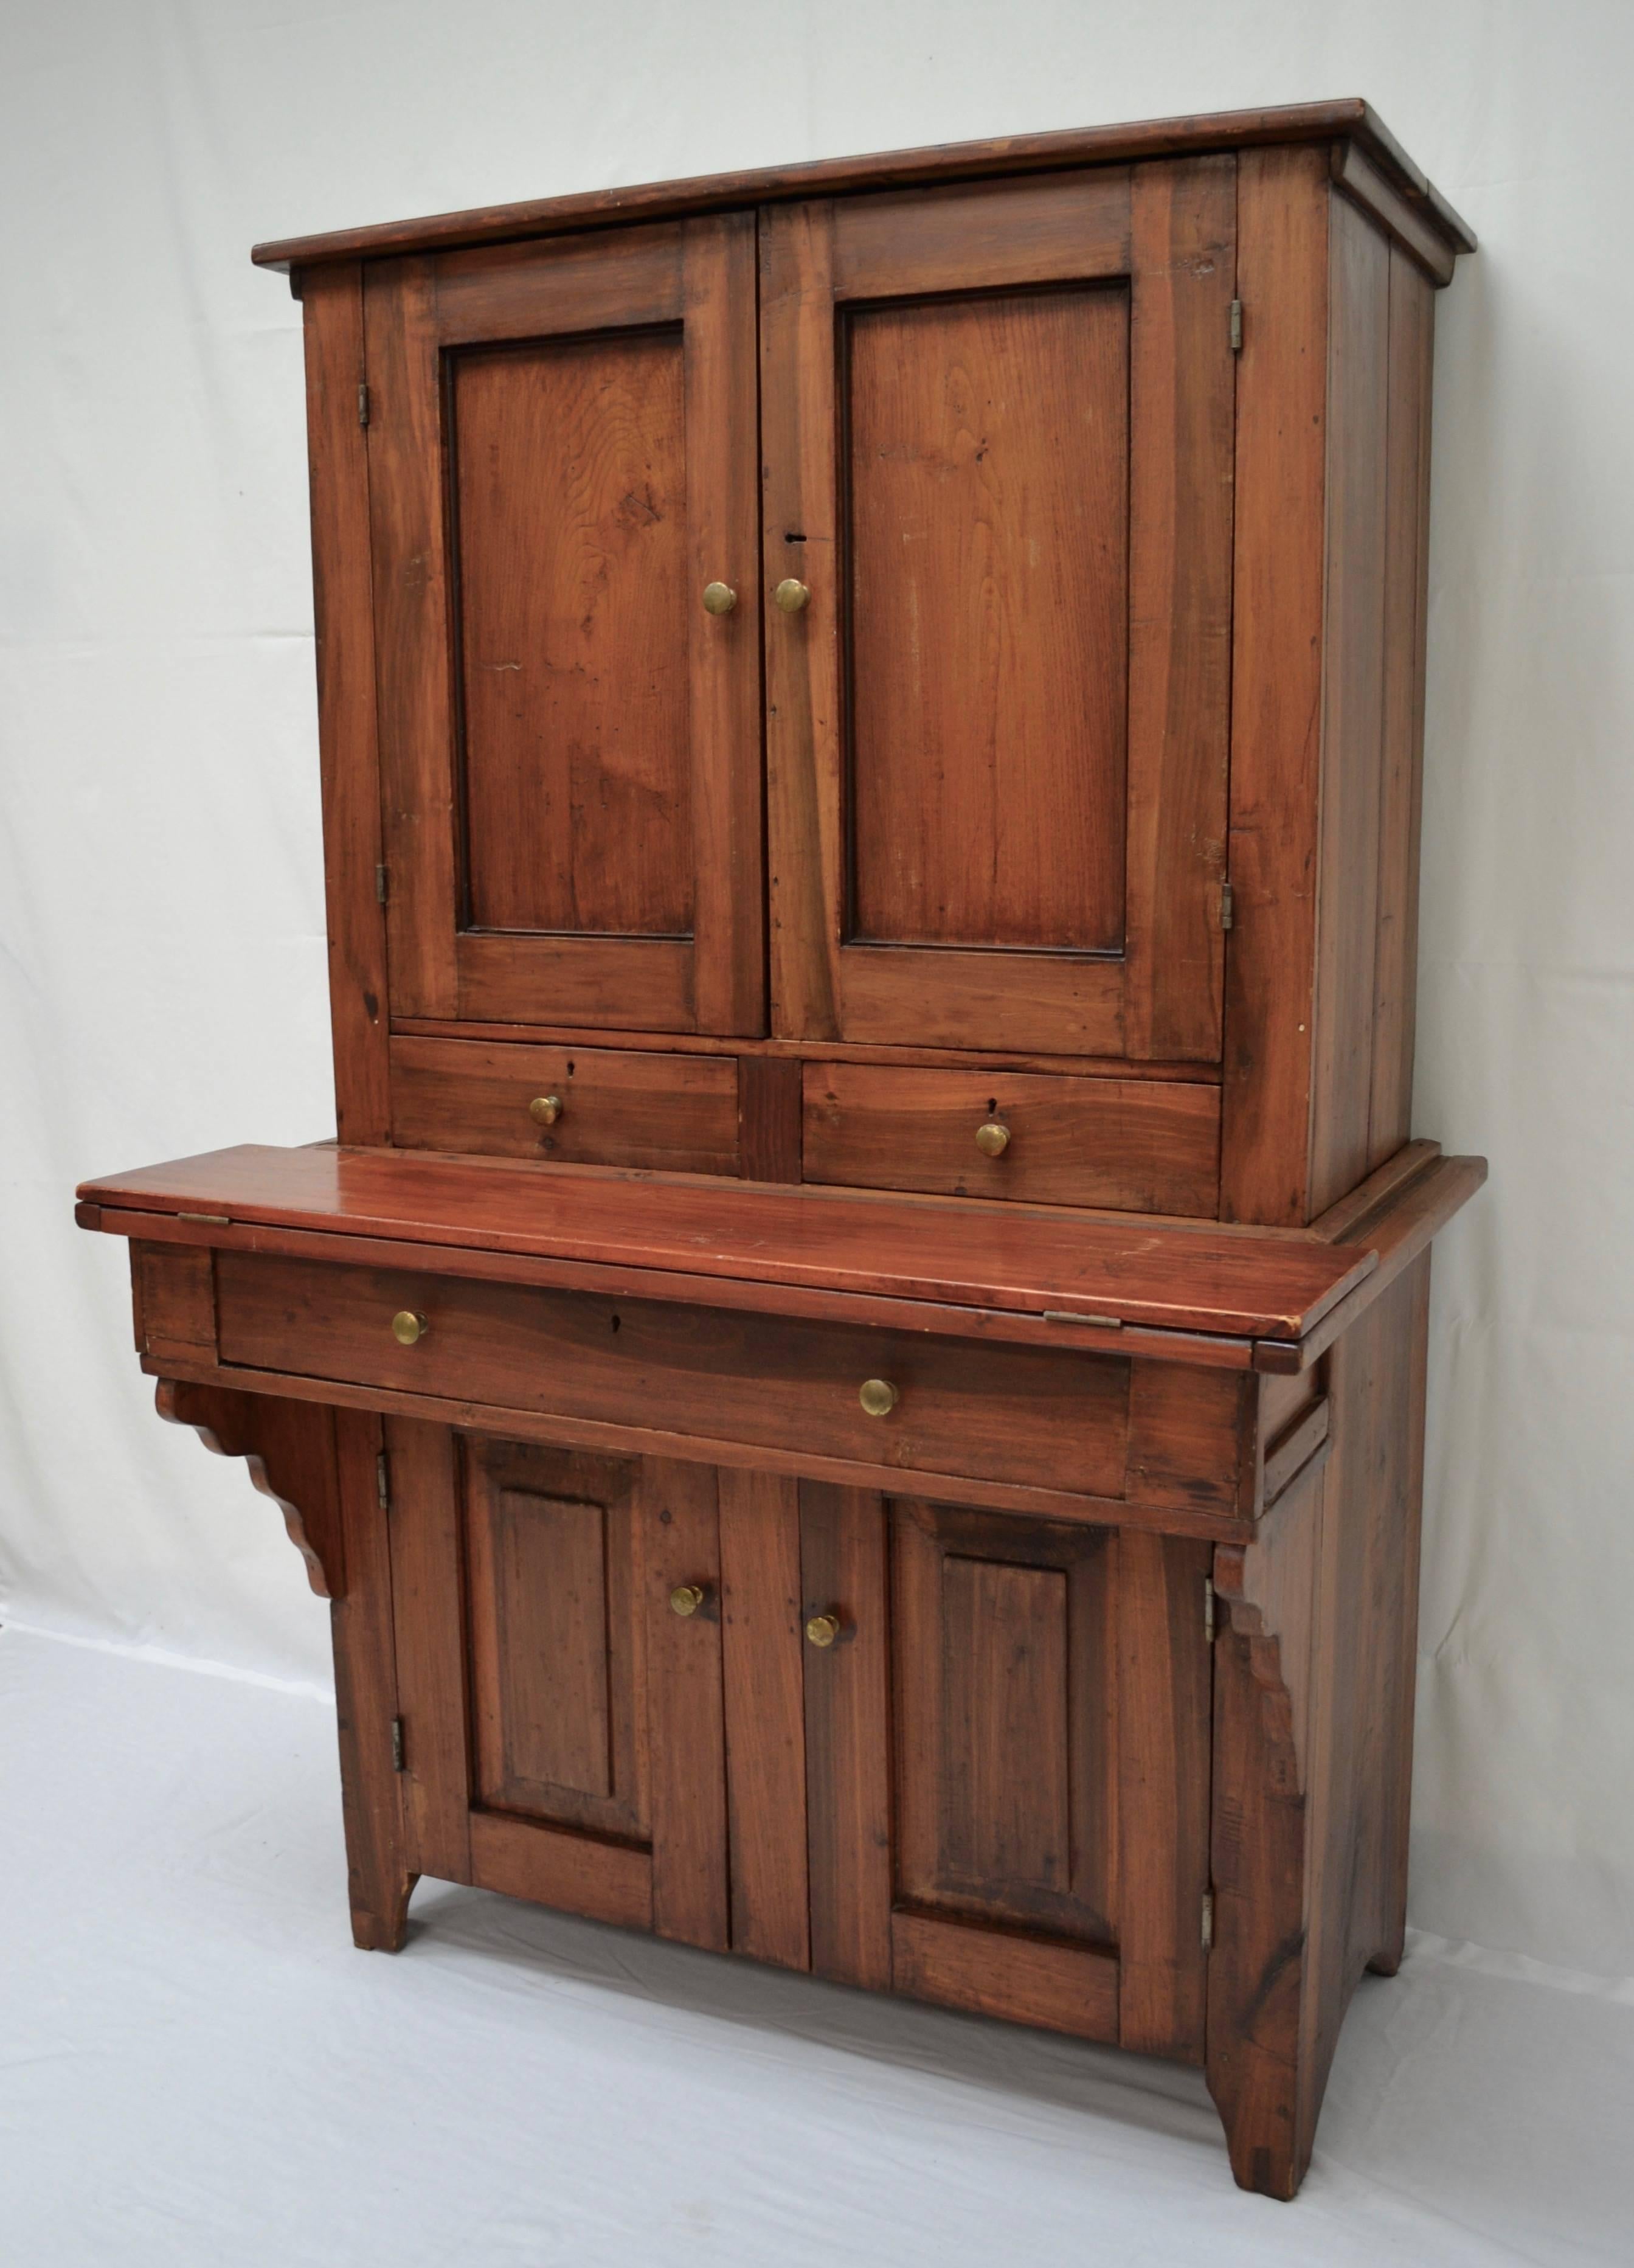 This is a charming and versatile plantation desk, journeyman-made in two pieces, in walnut and poplar. In the upper section two paneled and through-tenoned doors open wide to reveal seven small drawers and a number of vertical and horizontal